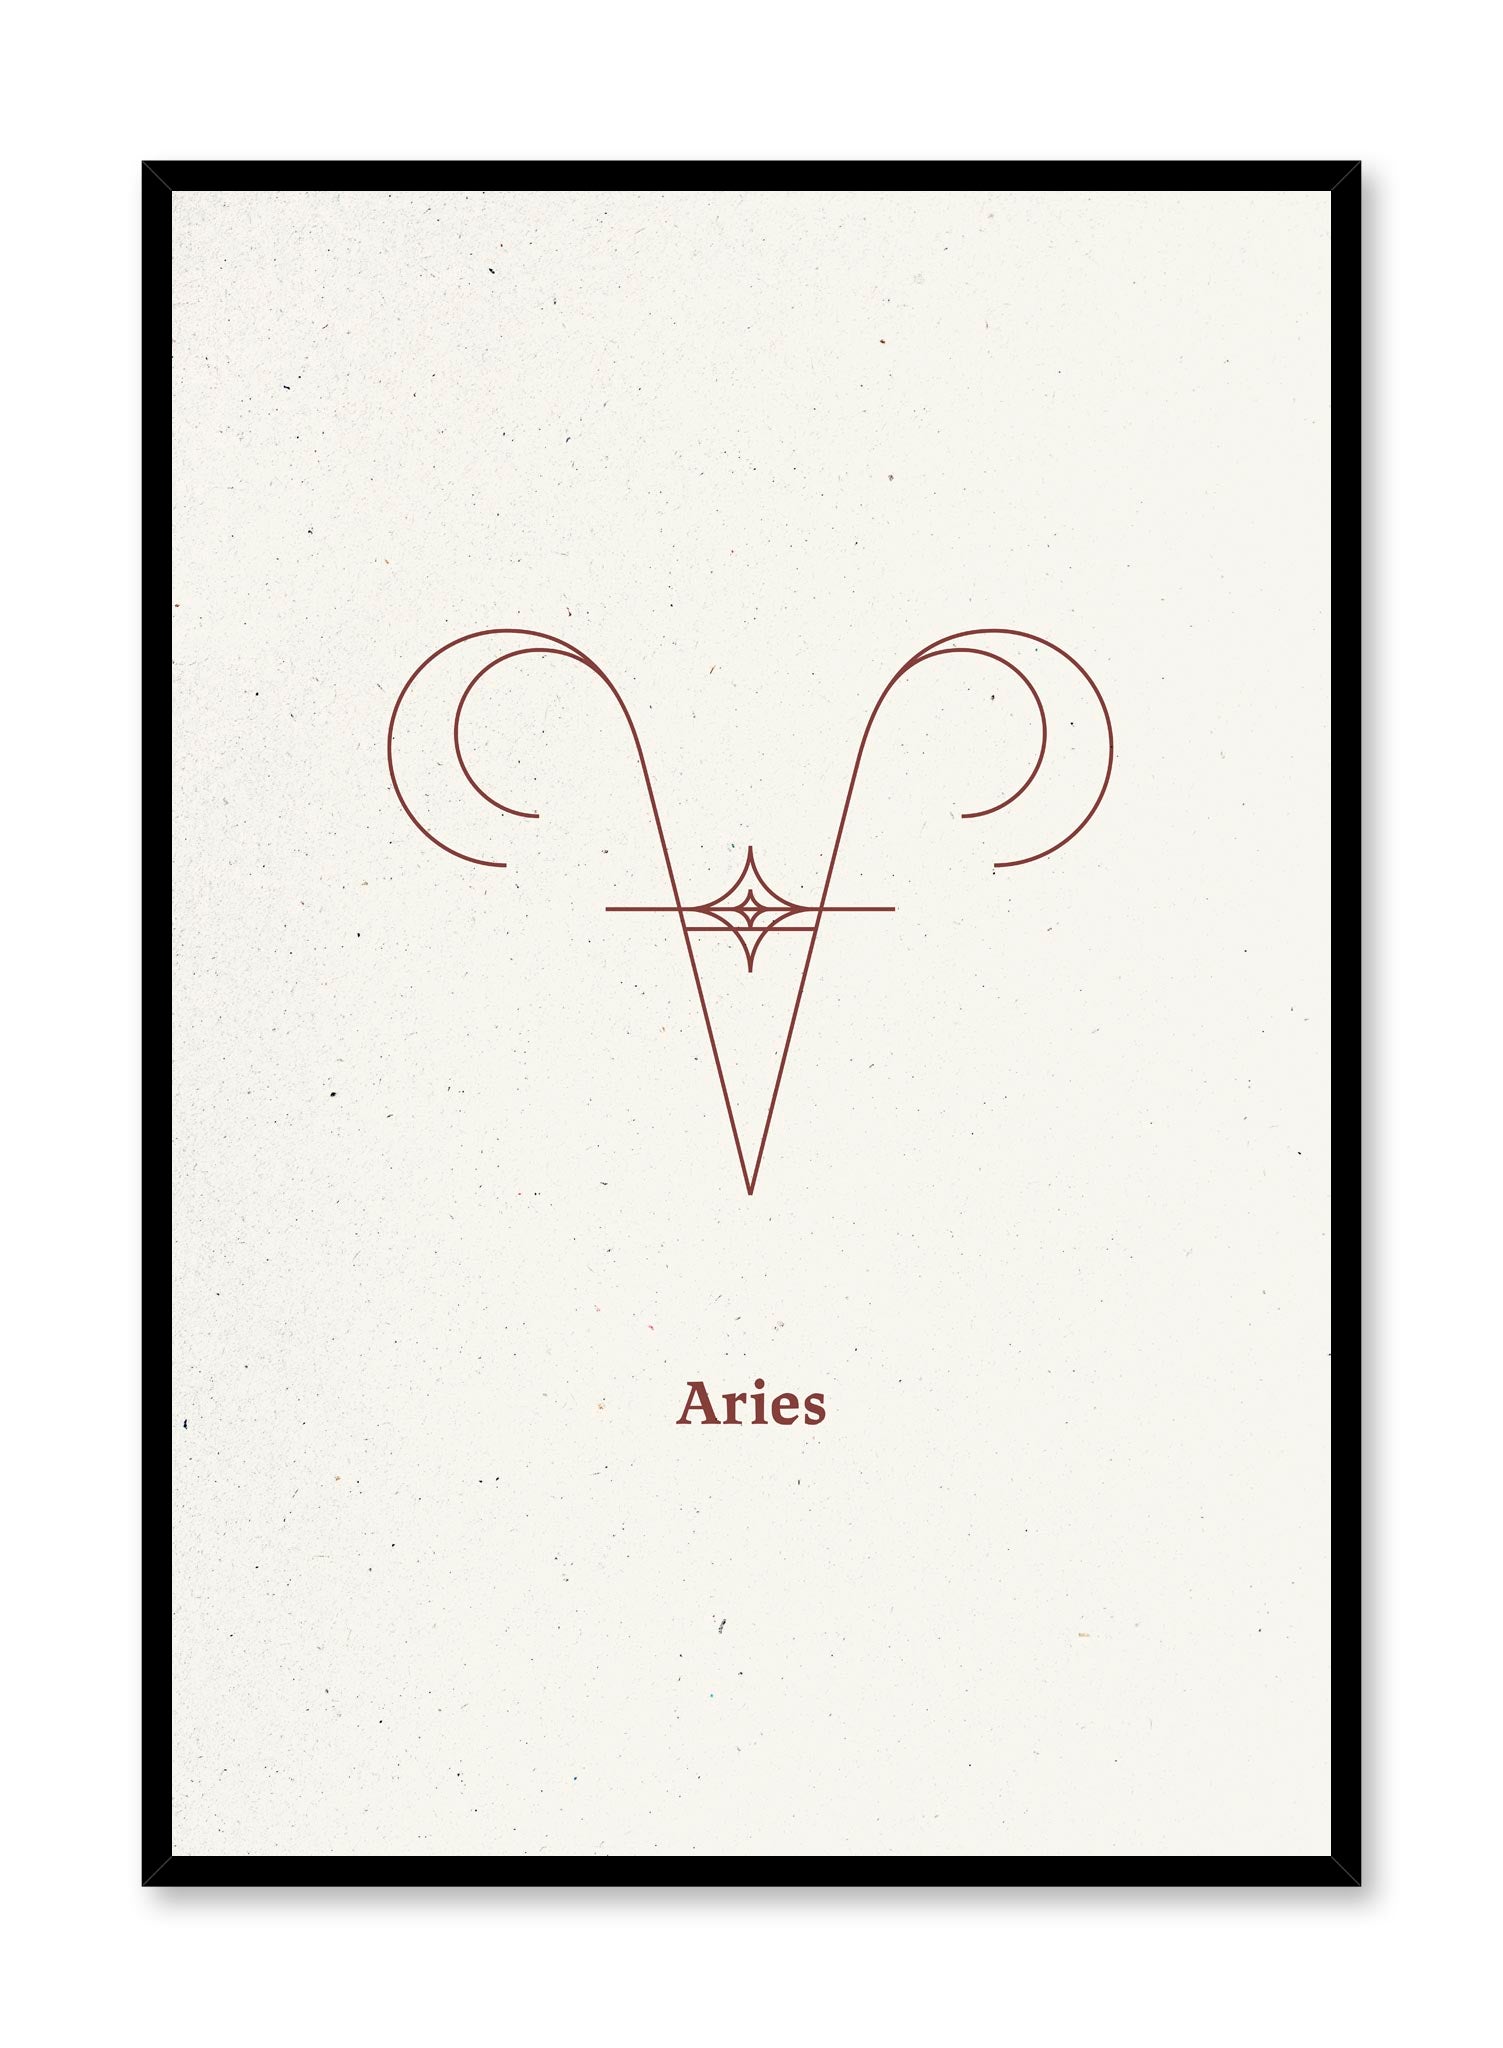 Minimalist celestial illustration poster by Opposite Wall with Aries symbol